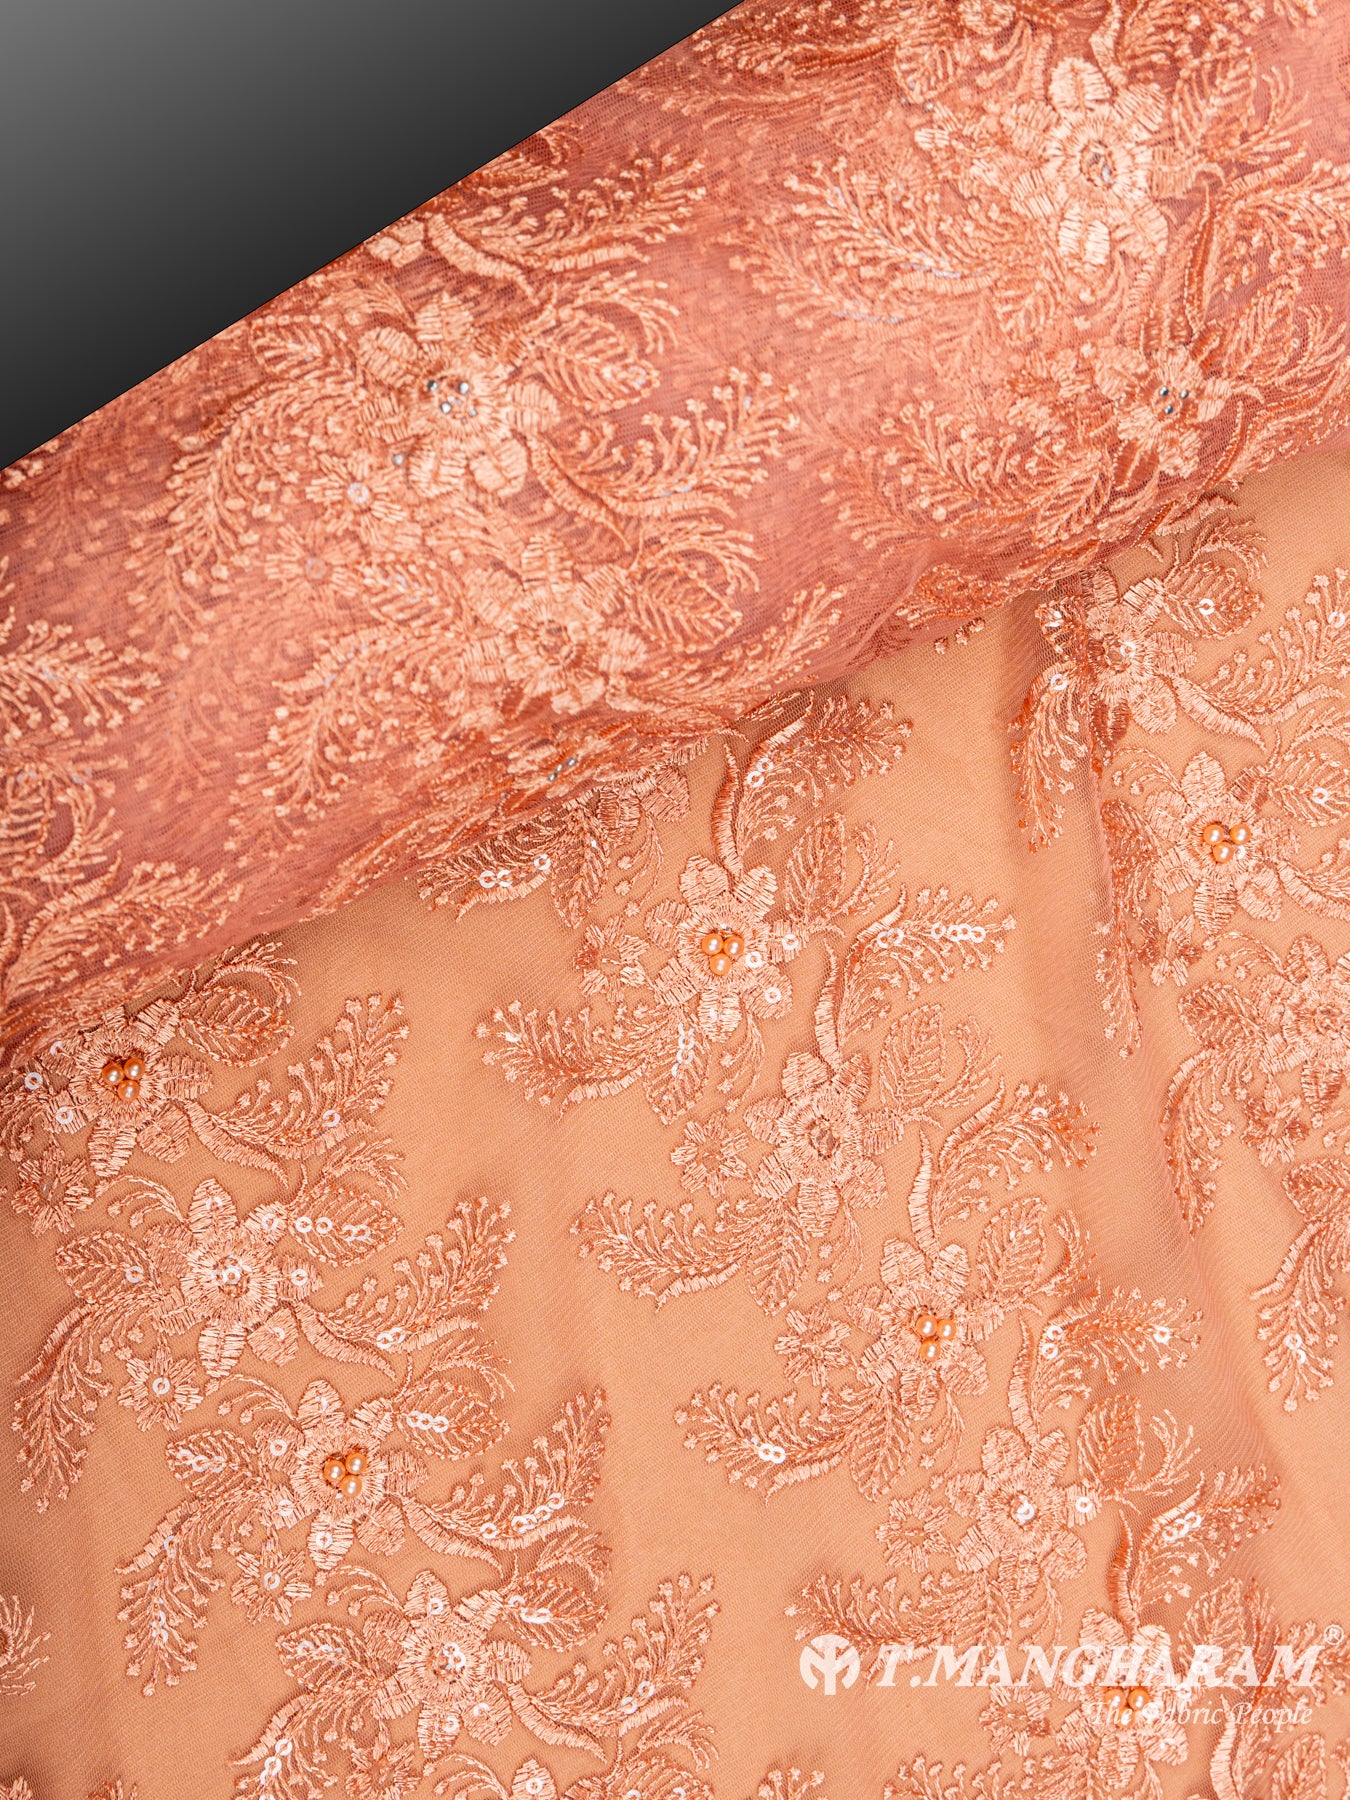 Peach Net Embroidery Fabric - EC6520 view-2